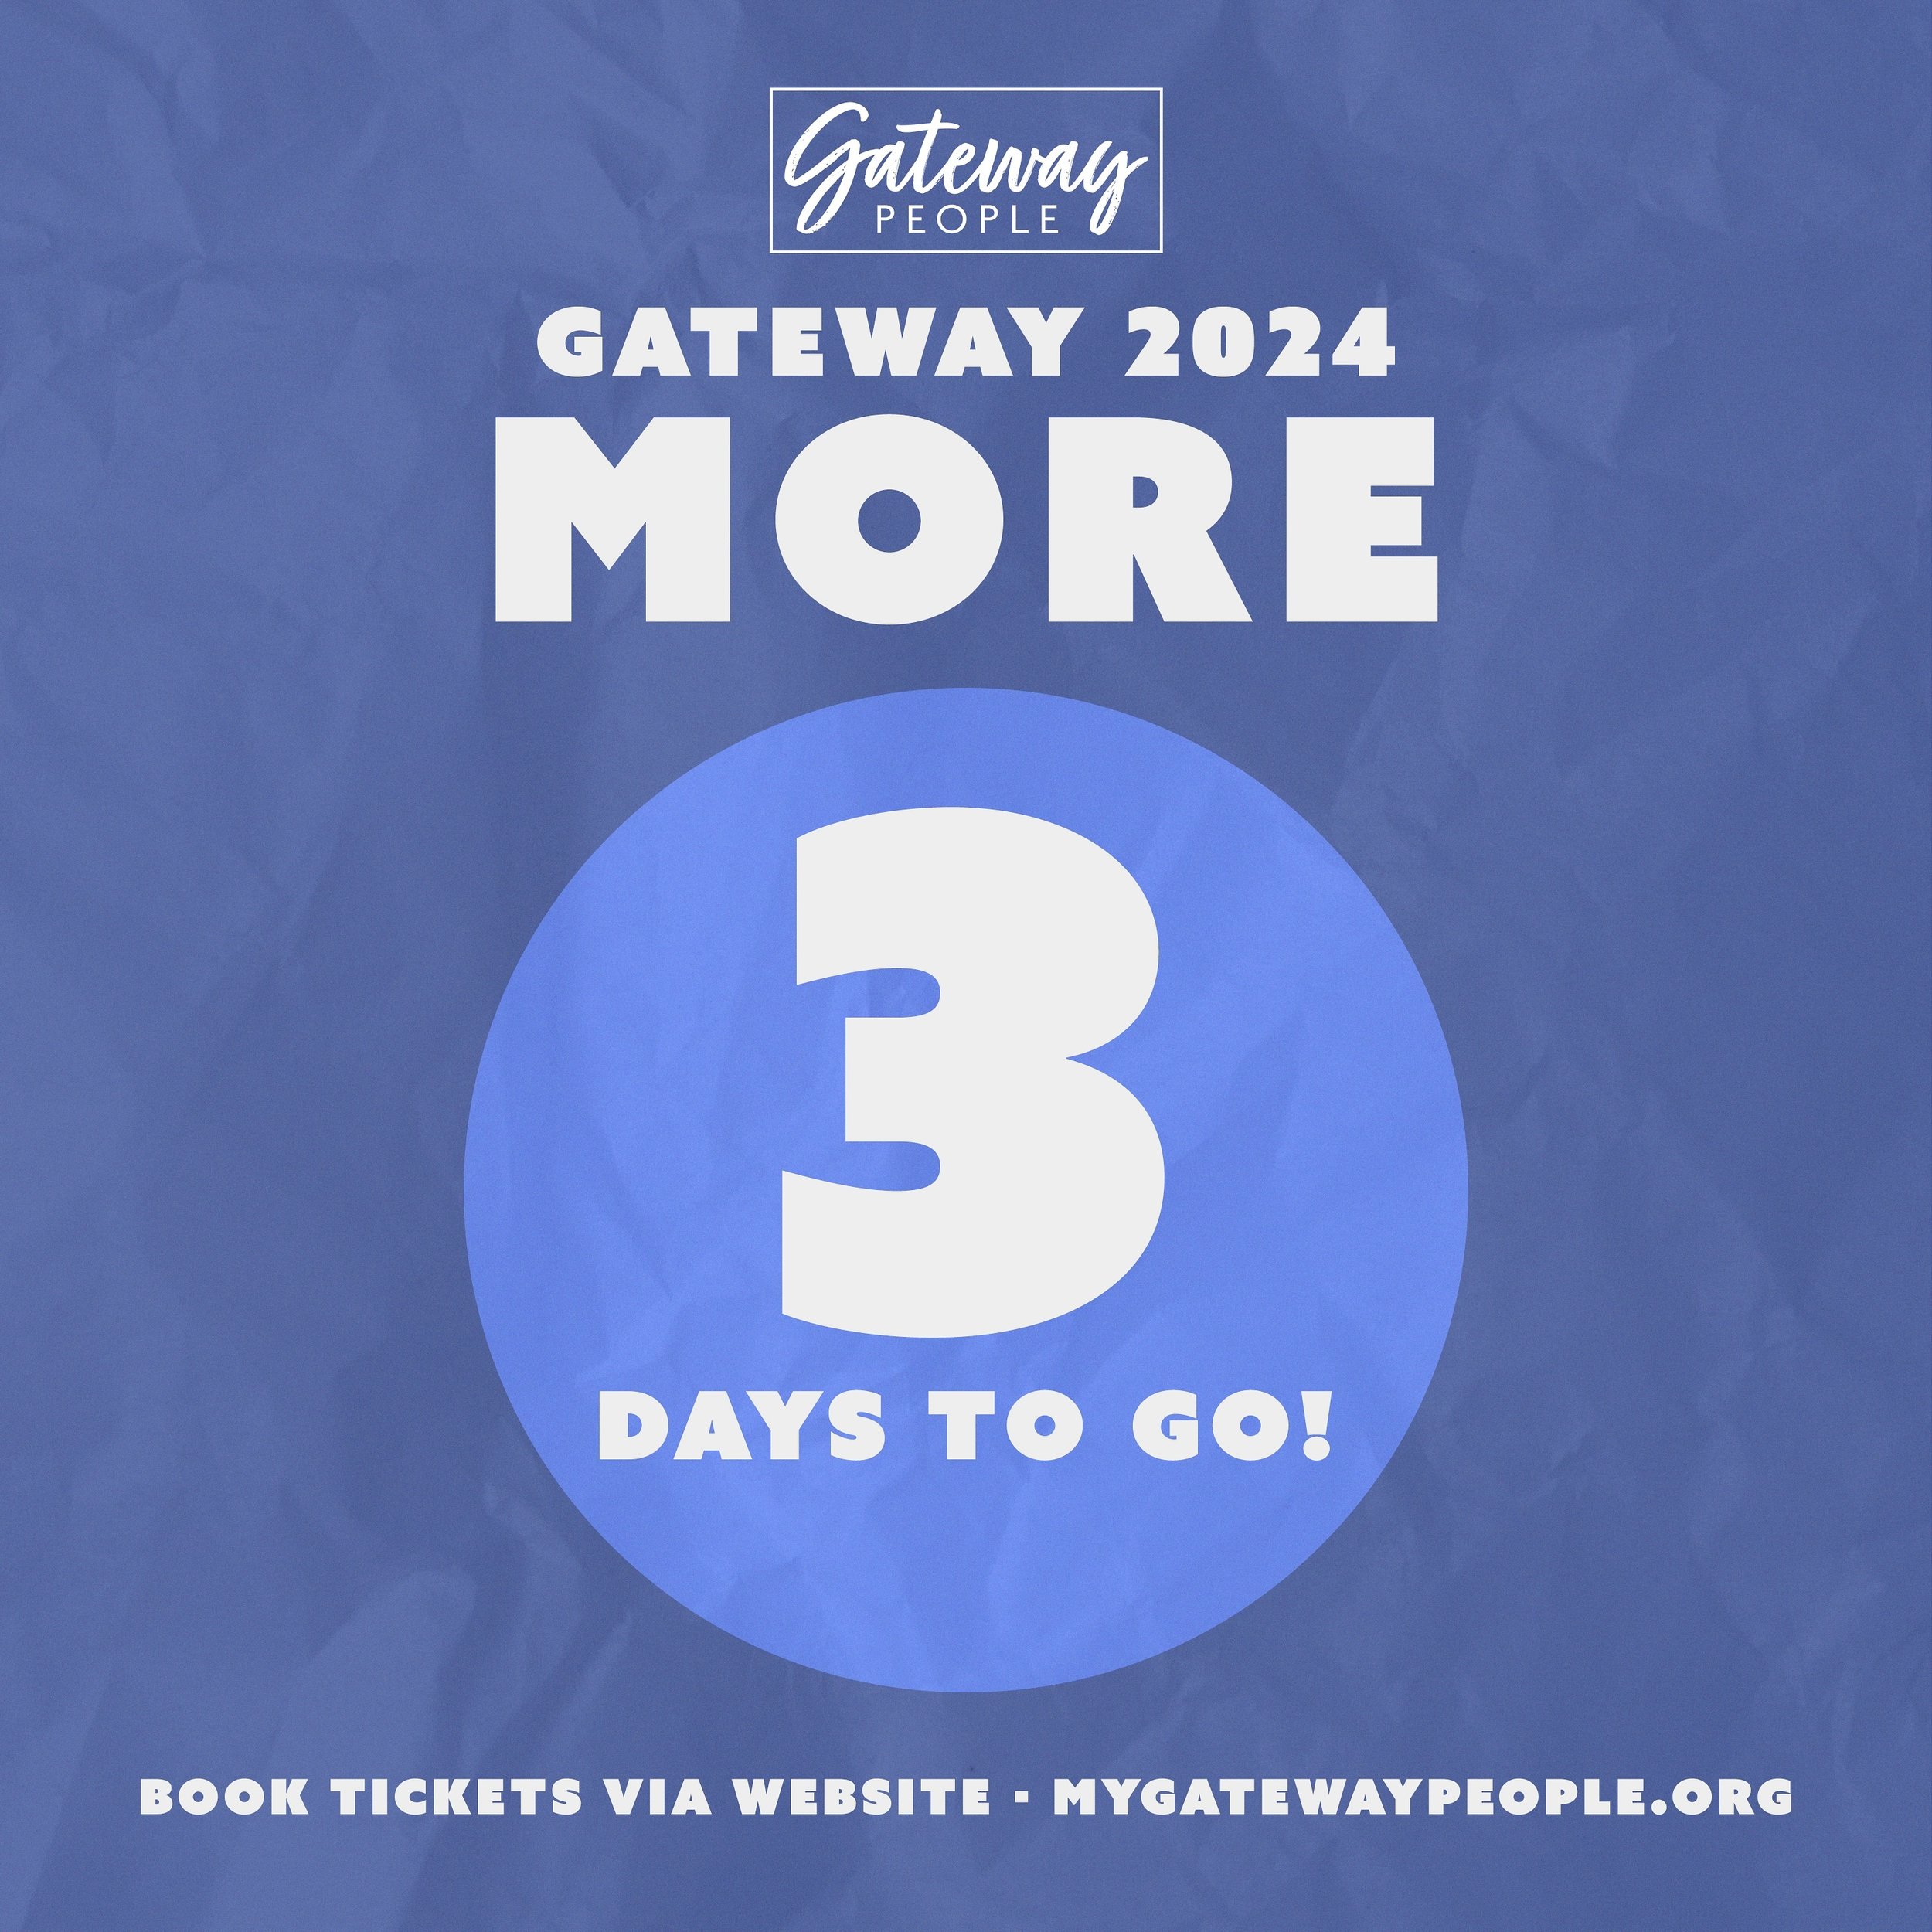 3 days!! 💙

💻 Graphic by @taliaharman.thecreative 

#gateway #2024 #conference #more #gateway2024 #citylifechurch #gatewaypeople #portsmouth #church #jesusisking #churchconference #wewantmore